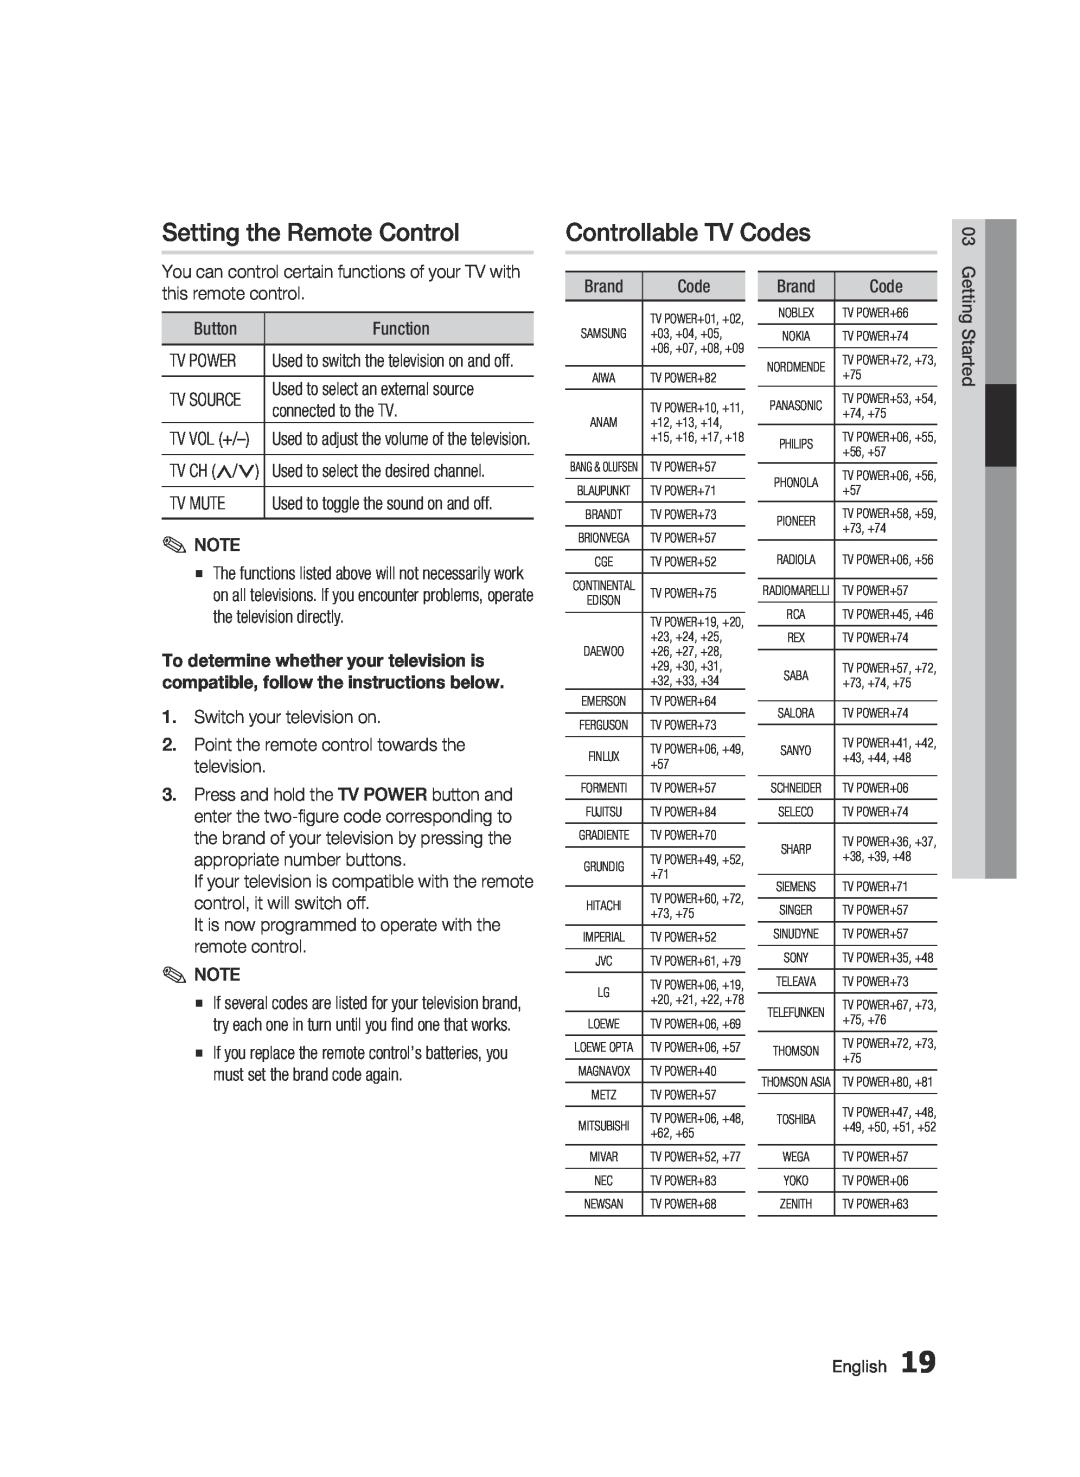 Samsung 01942G-BD-C6300-XAC-0823 user manual Setting the Remote Control, Controllable Tv Codes, Tv Source, Tv Vol + 